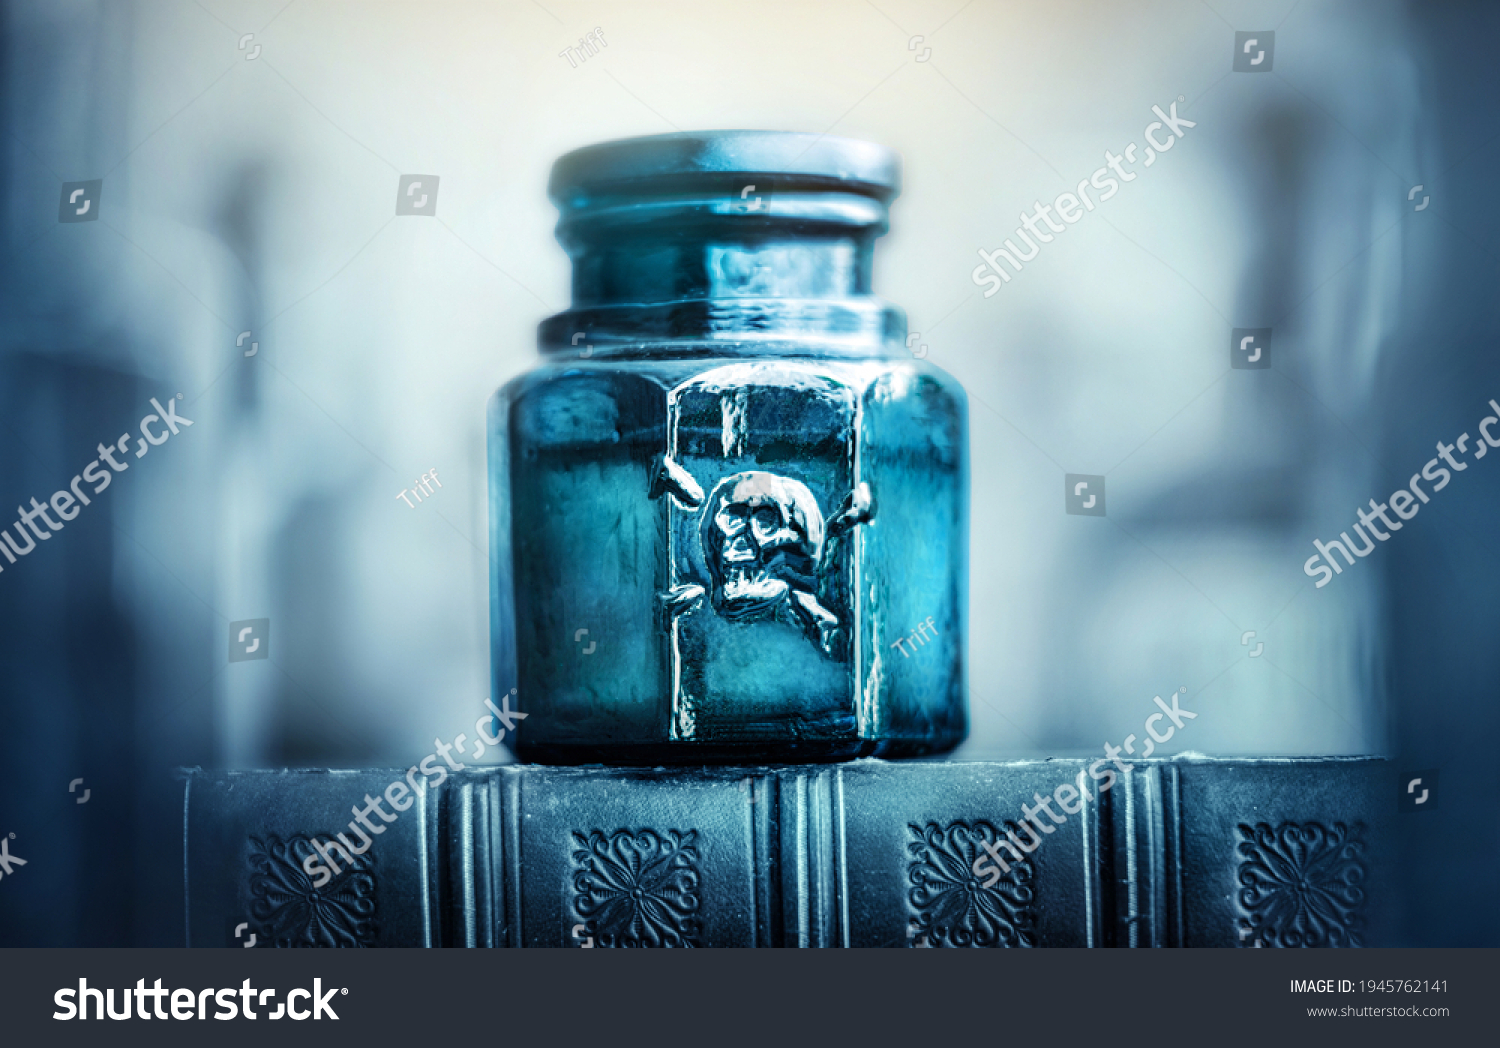 Glass poison bottle with skull and bones. Danger sign, symbol of death. Concept background on poison poisoning, pharmaceutical, chemistry, medical, old science topic. #1945762141